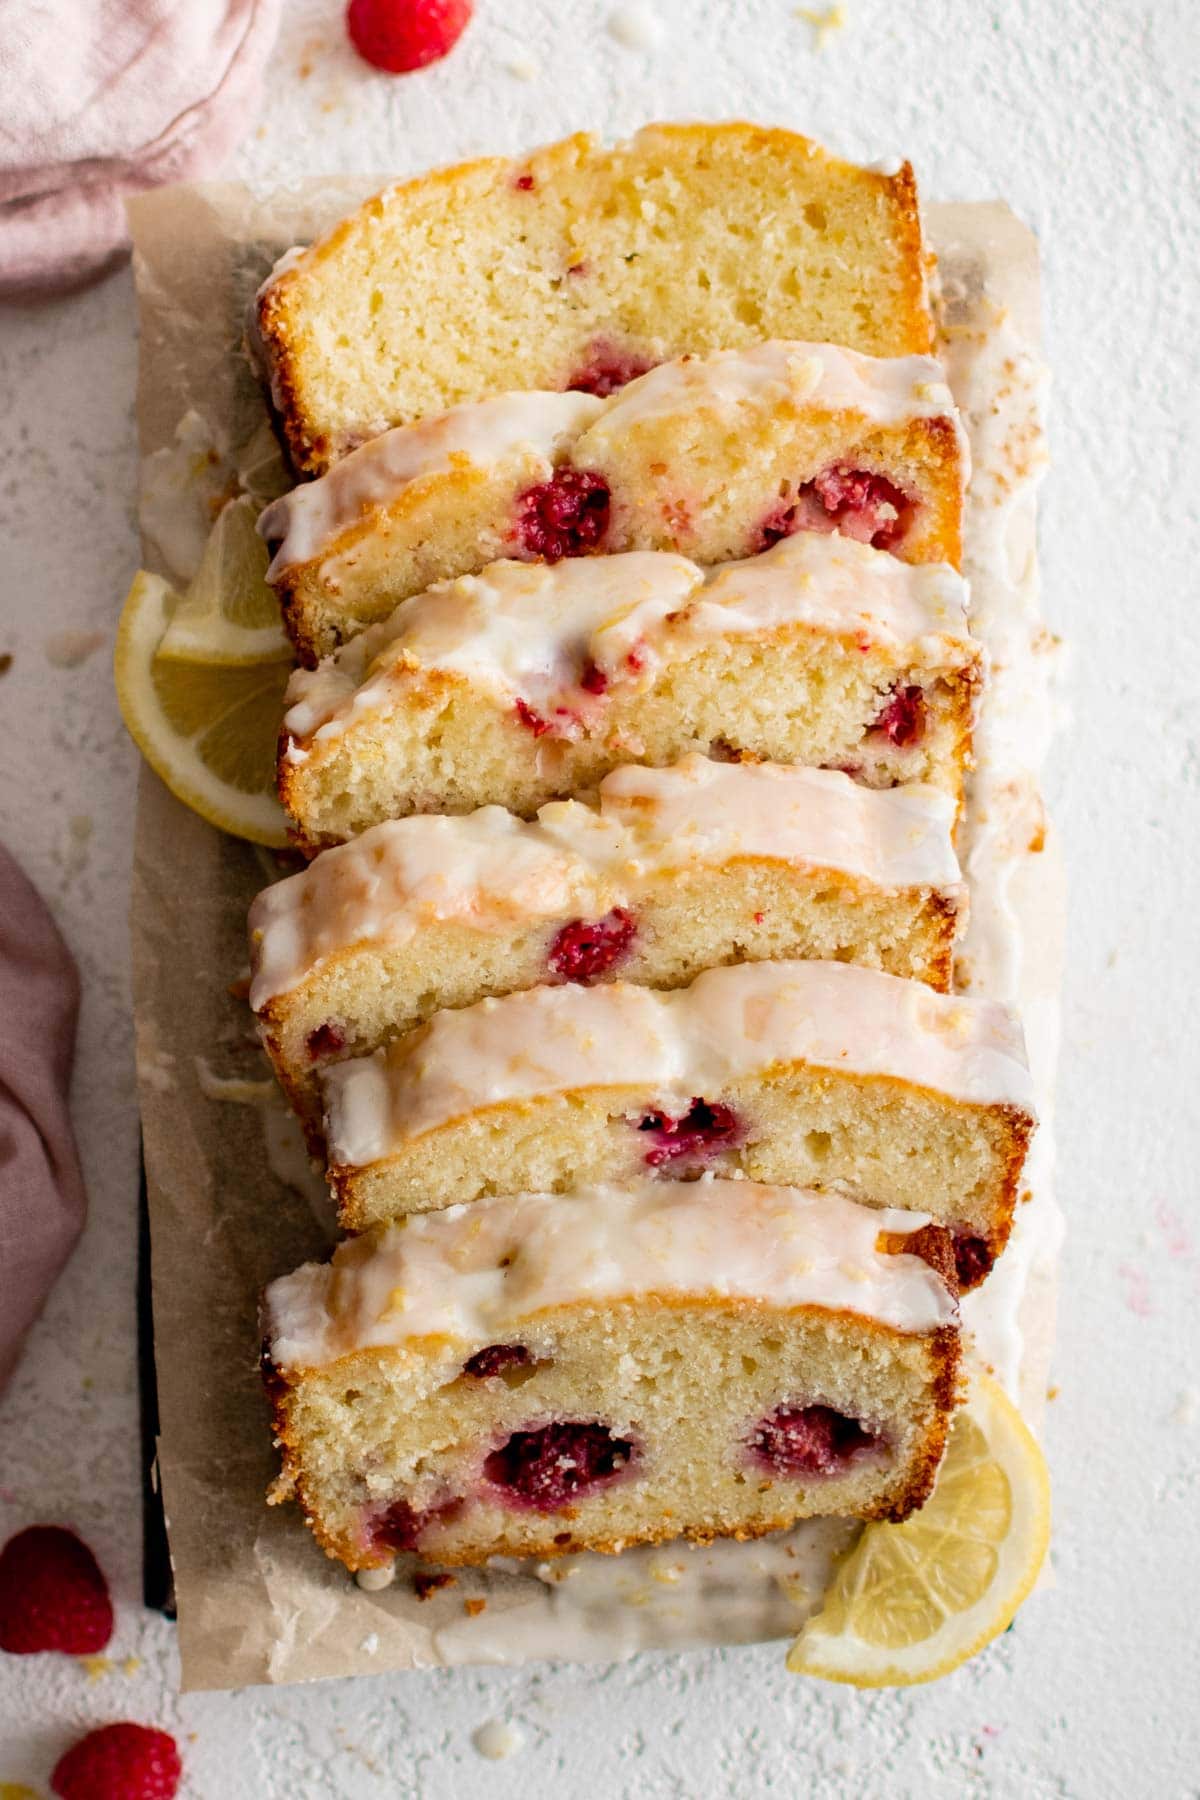 Lemon bread with raspberries and icing, sliced into 6 pieces.